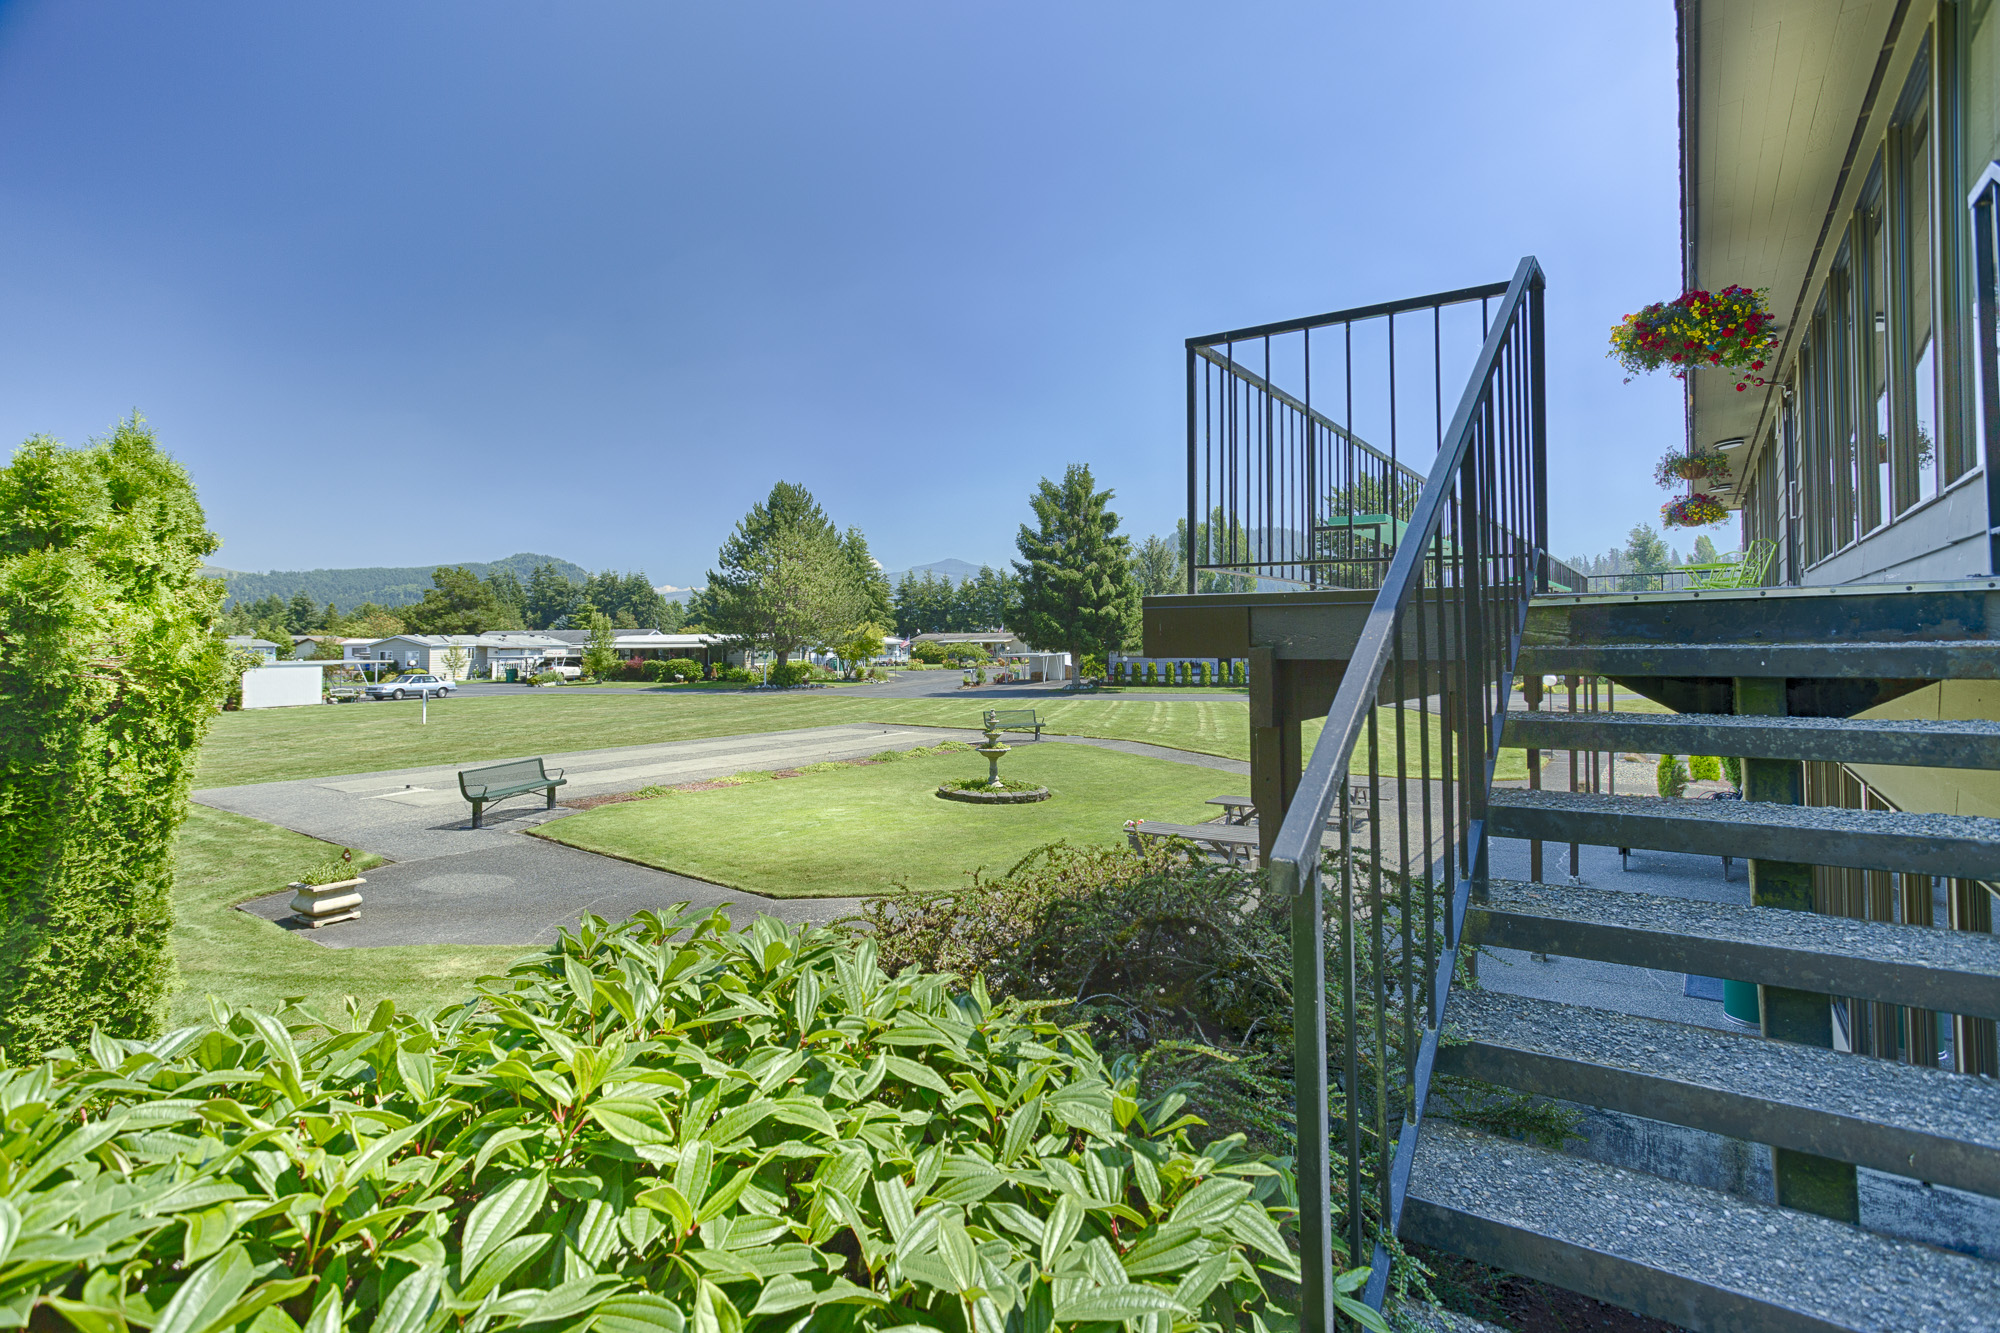 Open outdoor area with clean, cut grass, and well maintained landscape. Staircase leading up to the second level balcony of the community center.